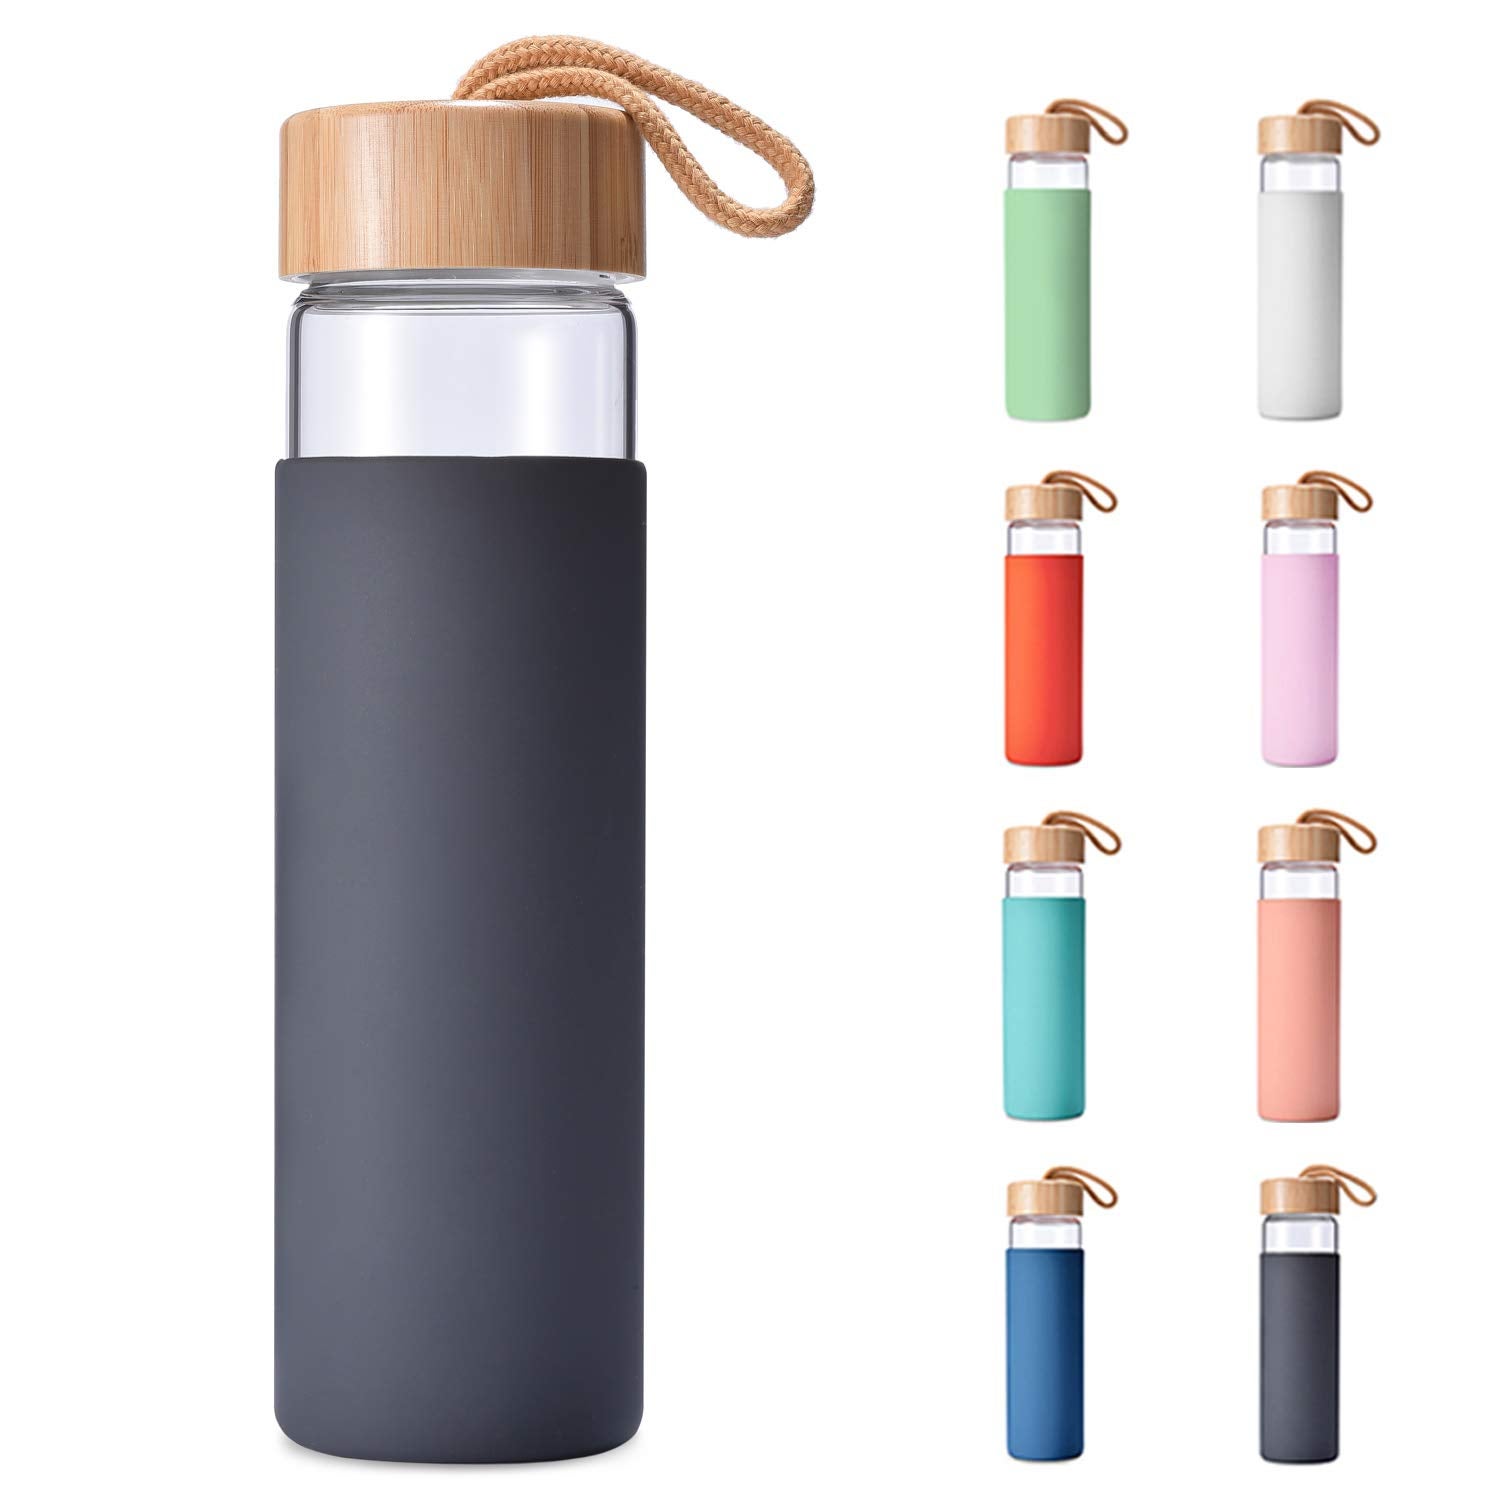 10 Cool and Eco-friendly Reusable Water Bottles - Design Swan